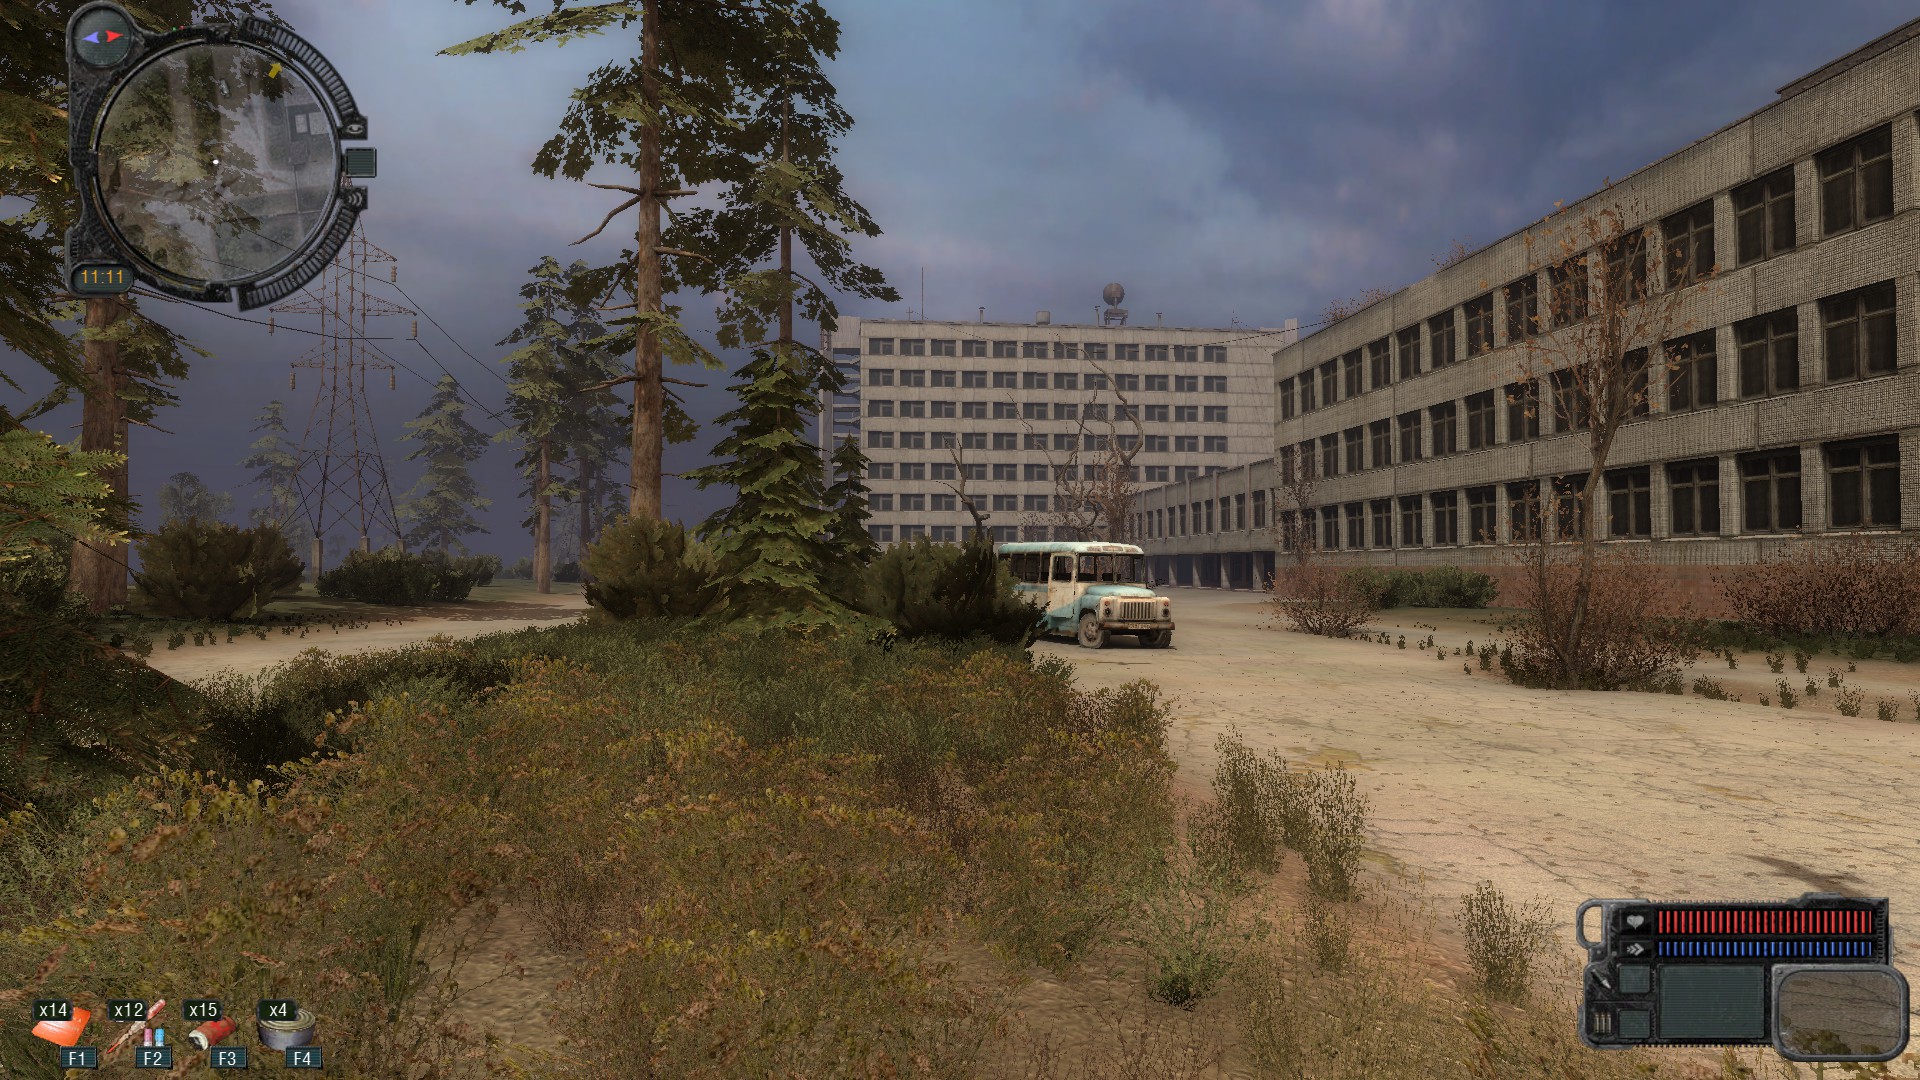 A road leads by an abandoned office building with an old bus in the middle. There's some brush past the road with some evergreens. Military-looking UI is in the corners.